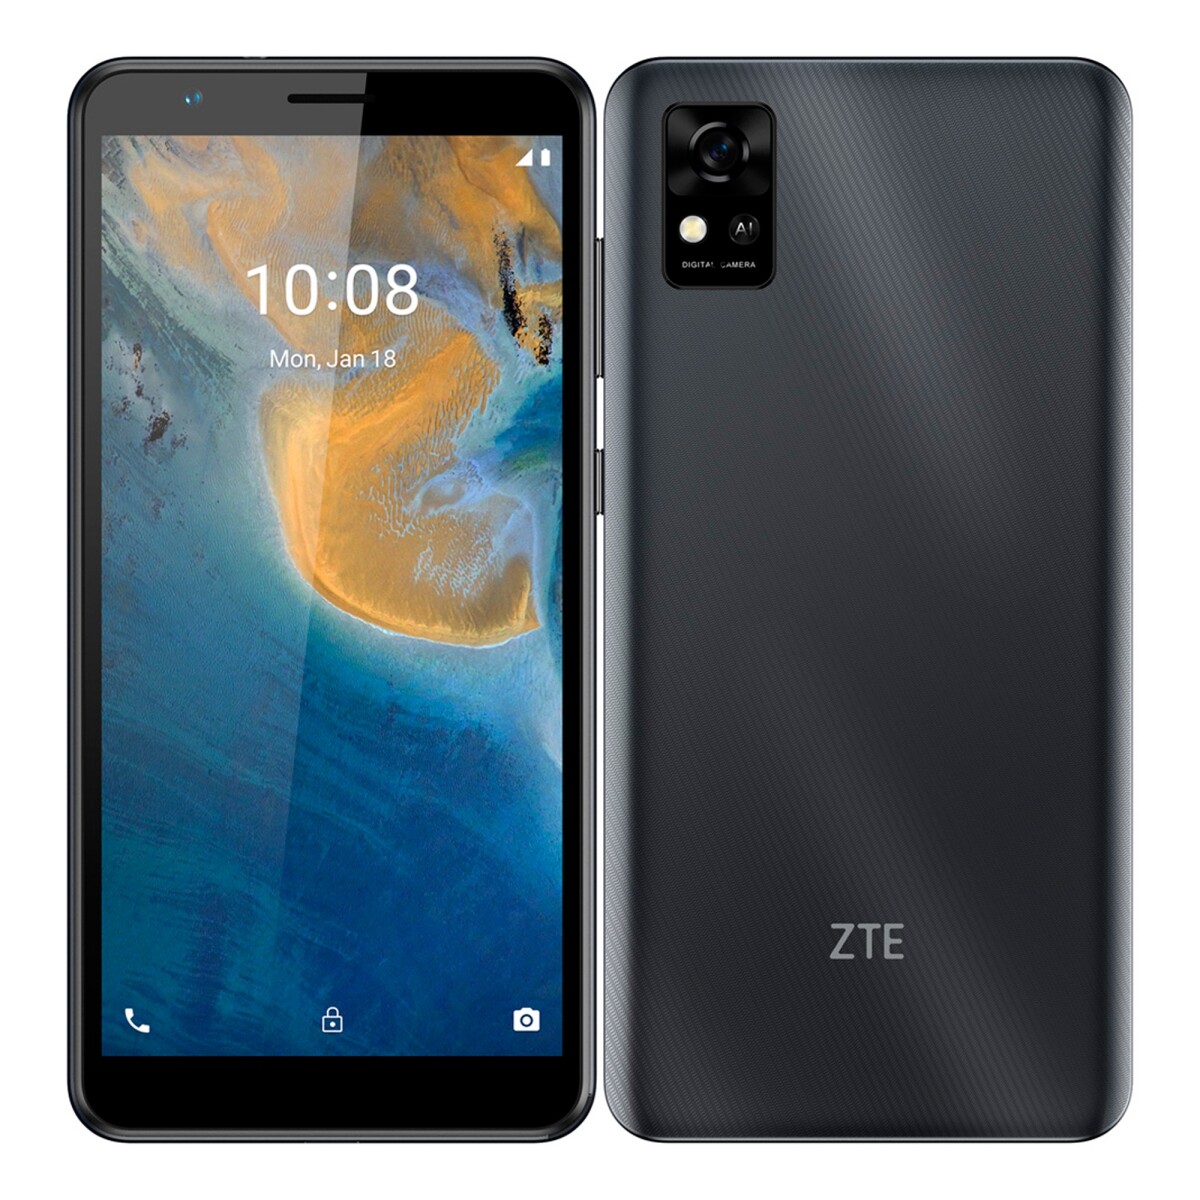 Zte - Smartphone Blade A31 - 5,45" Multitáctil Ips Lcd. Dualsim. 4G. Octa Core. Android 11. Ram 2GB - 001 